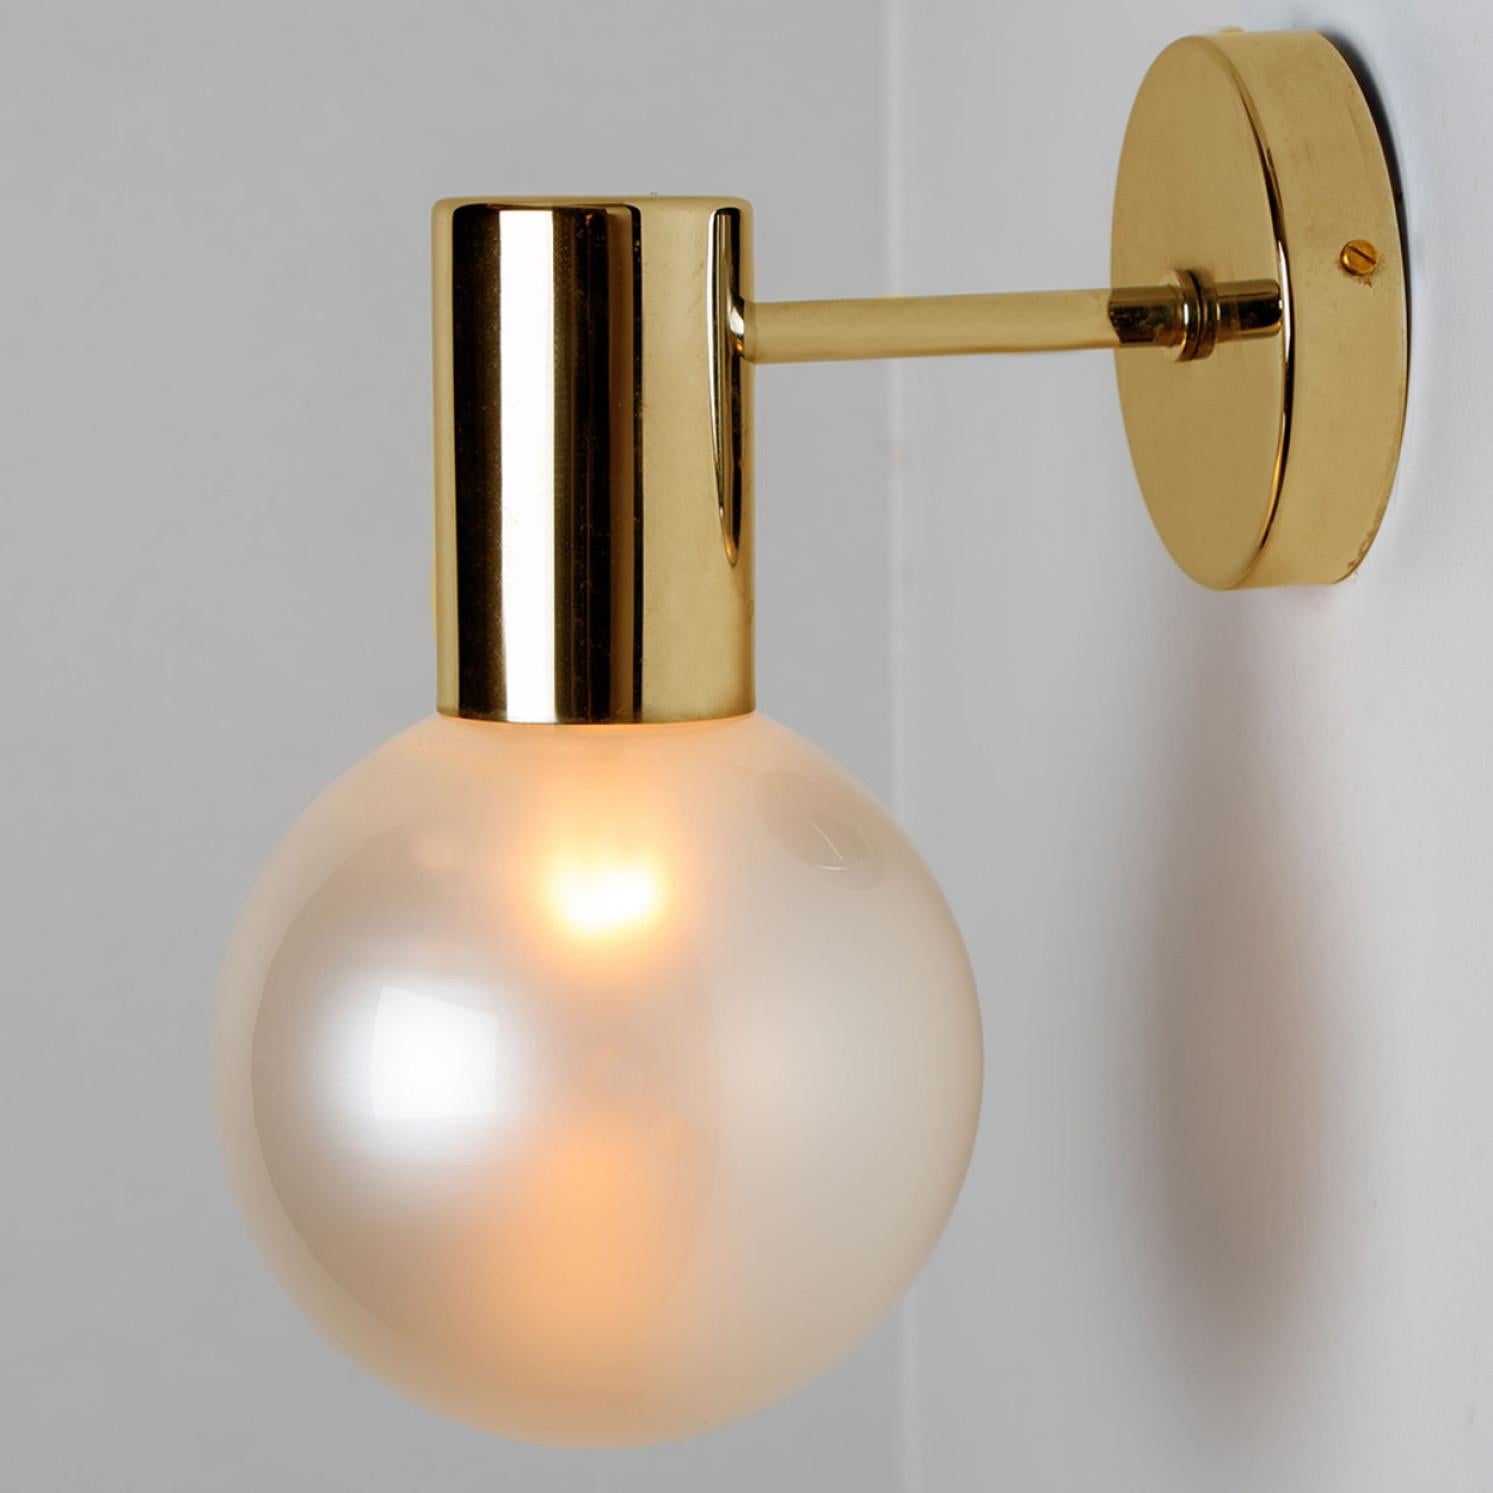 20th Century Opal Glass and Brass Wall Lights by Glashütte Limburg, 1970s For Sale